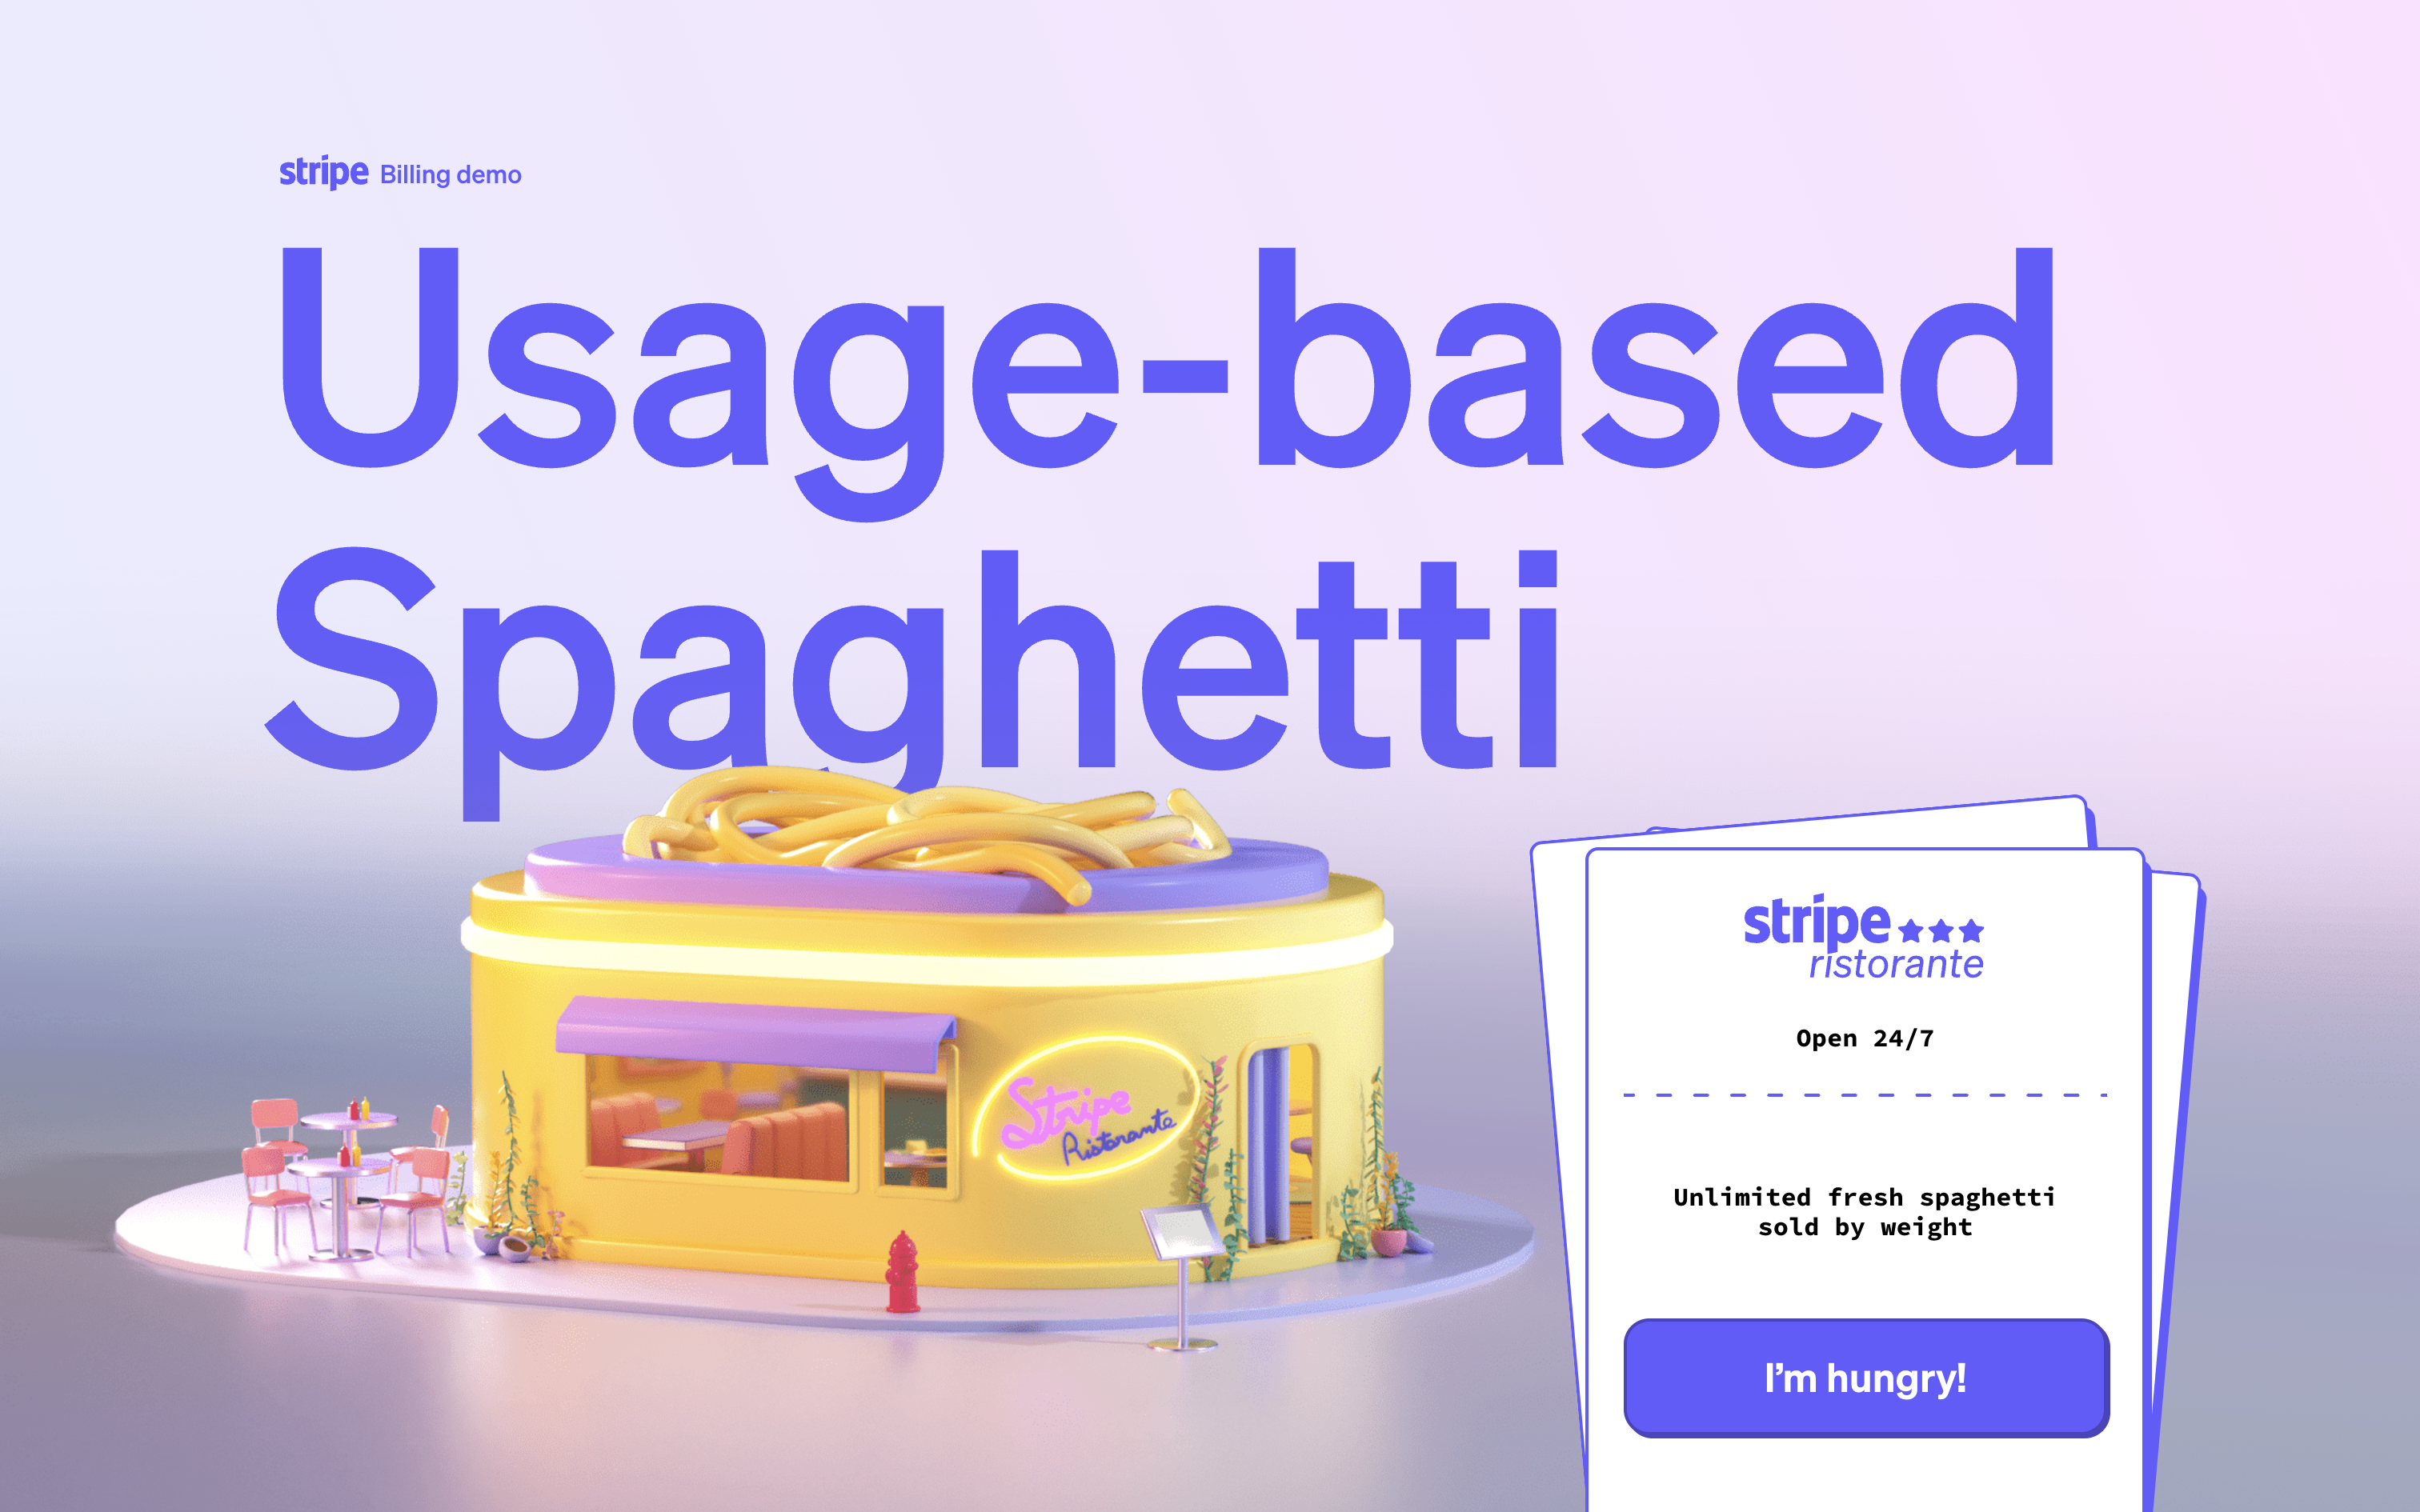 usage-based-spaghetti - Unlimited fresh spaghetti sold by weight